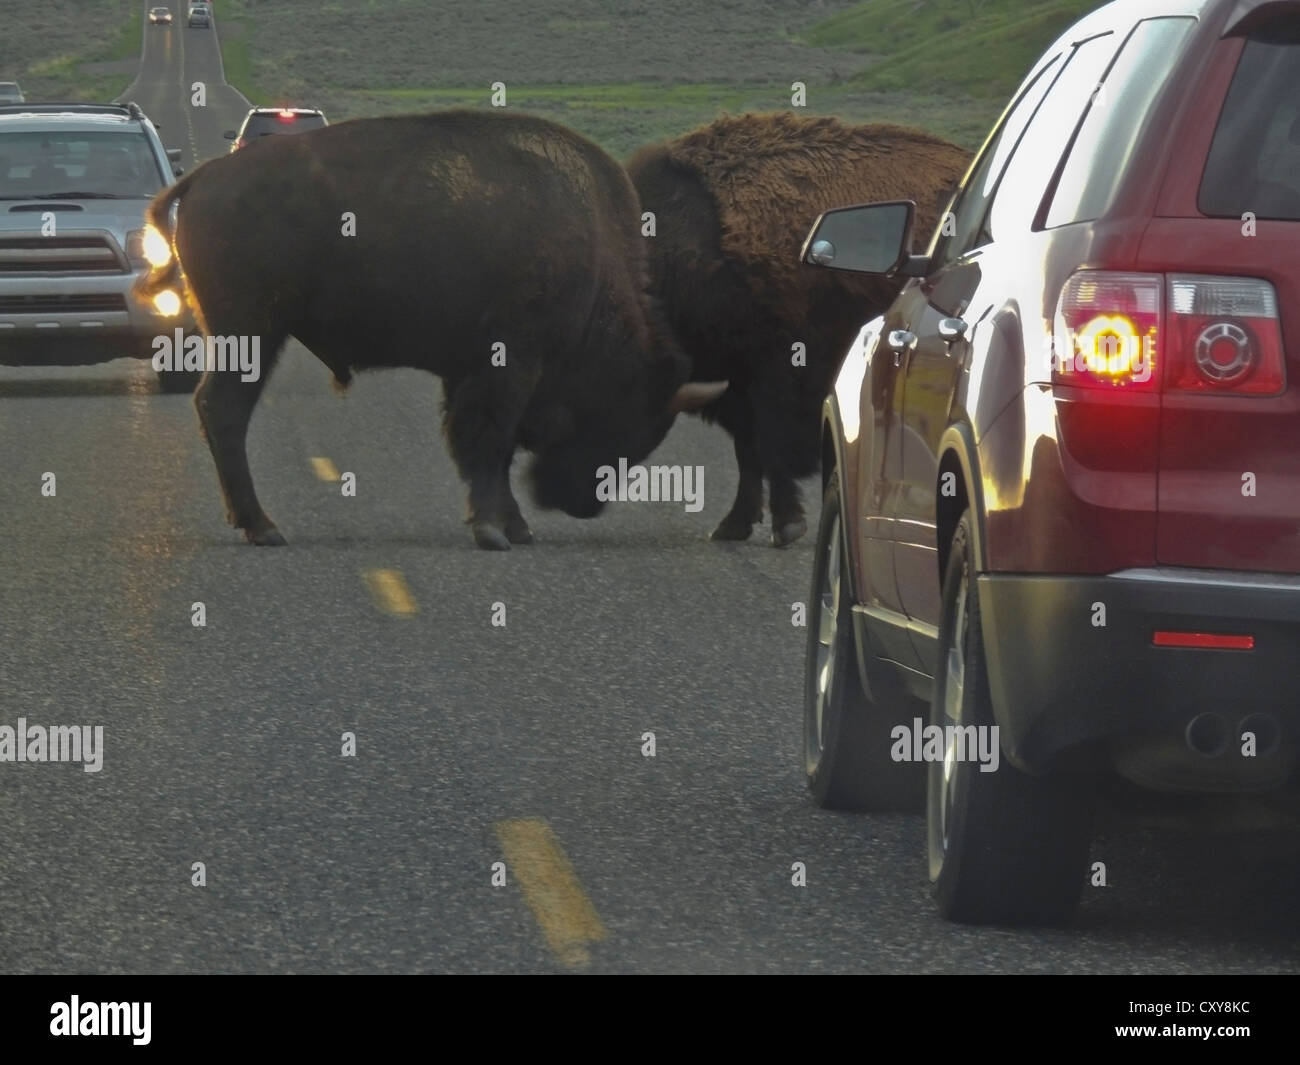 Bison conflict interrupts traffic in Yellowstone National Park, Wyoming. Stock Photo